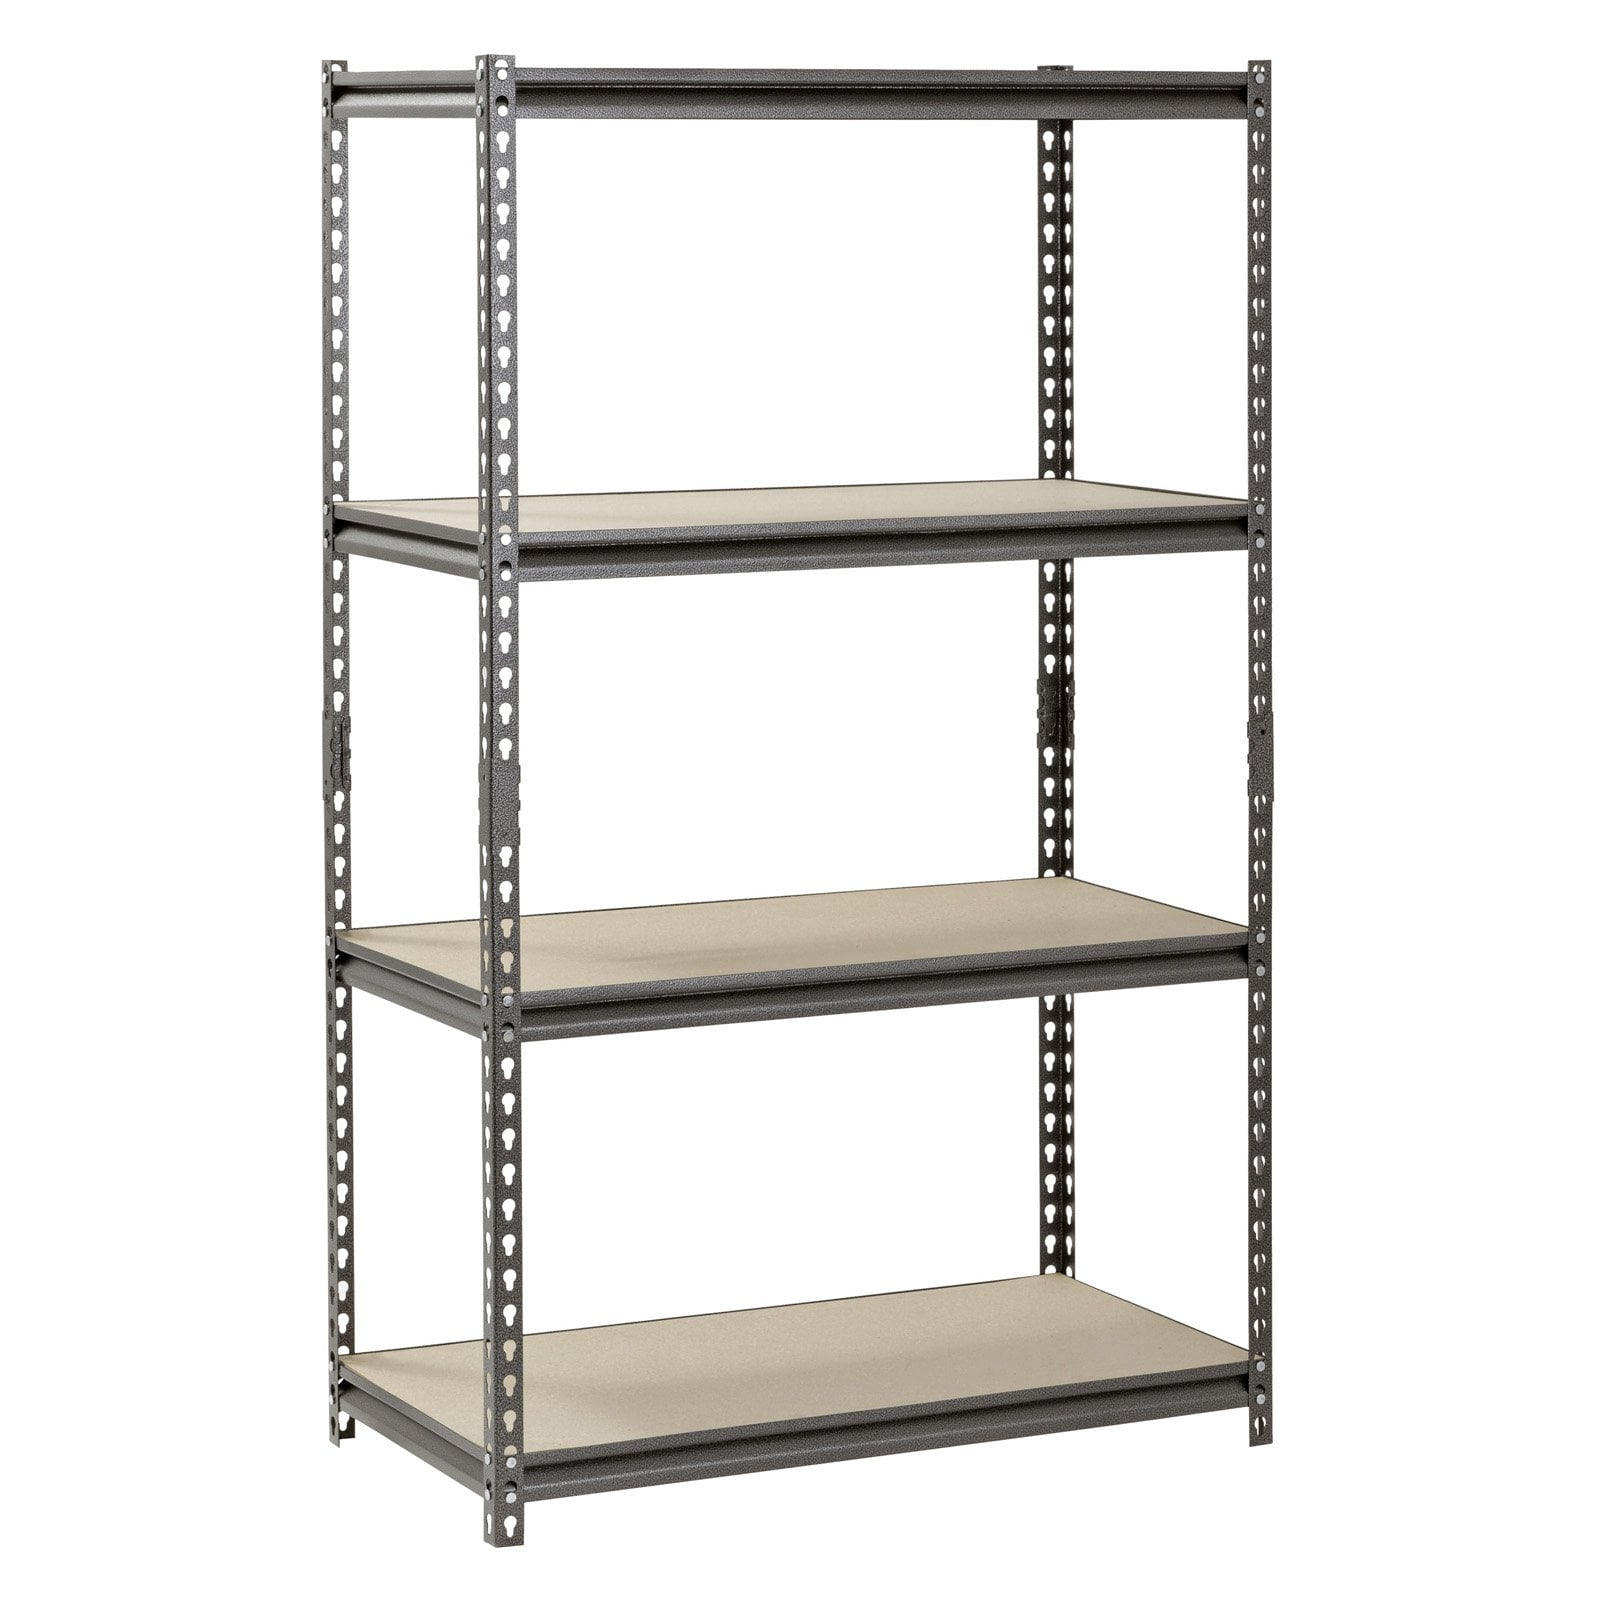 SPARE PARTS FOR METAL SHELVING UNIT INDUSTRIAL HEAVY DUTY RACKING 4 COLOURS 